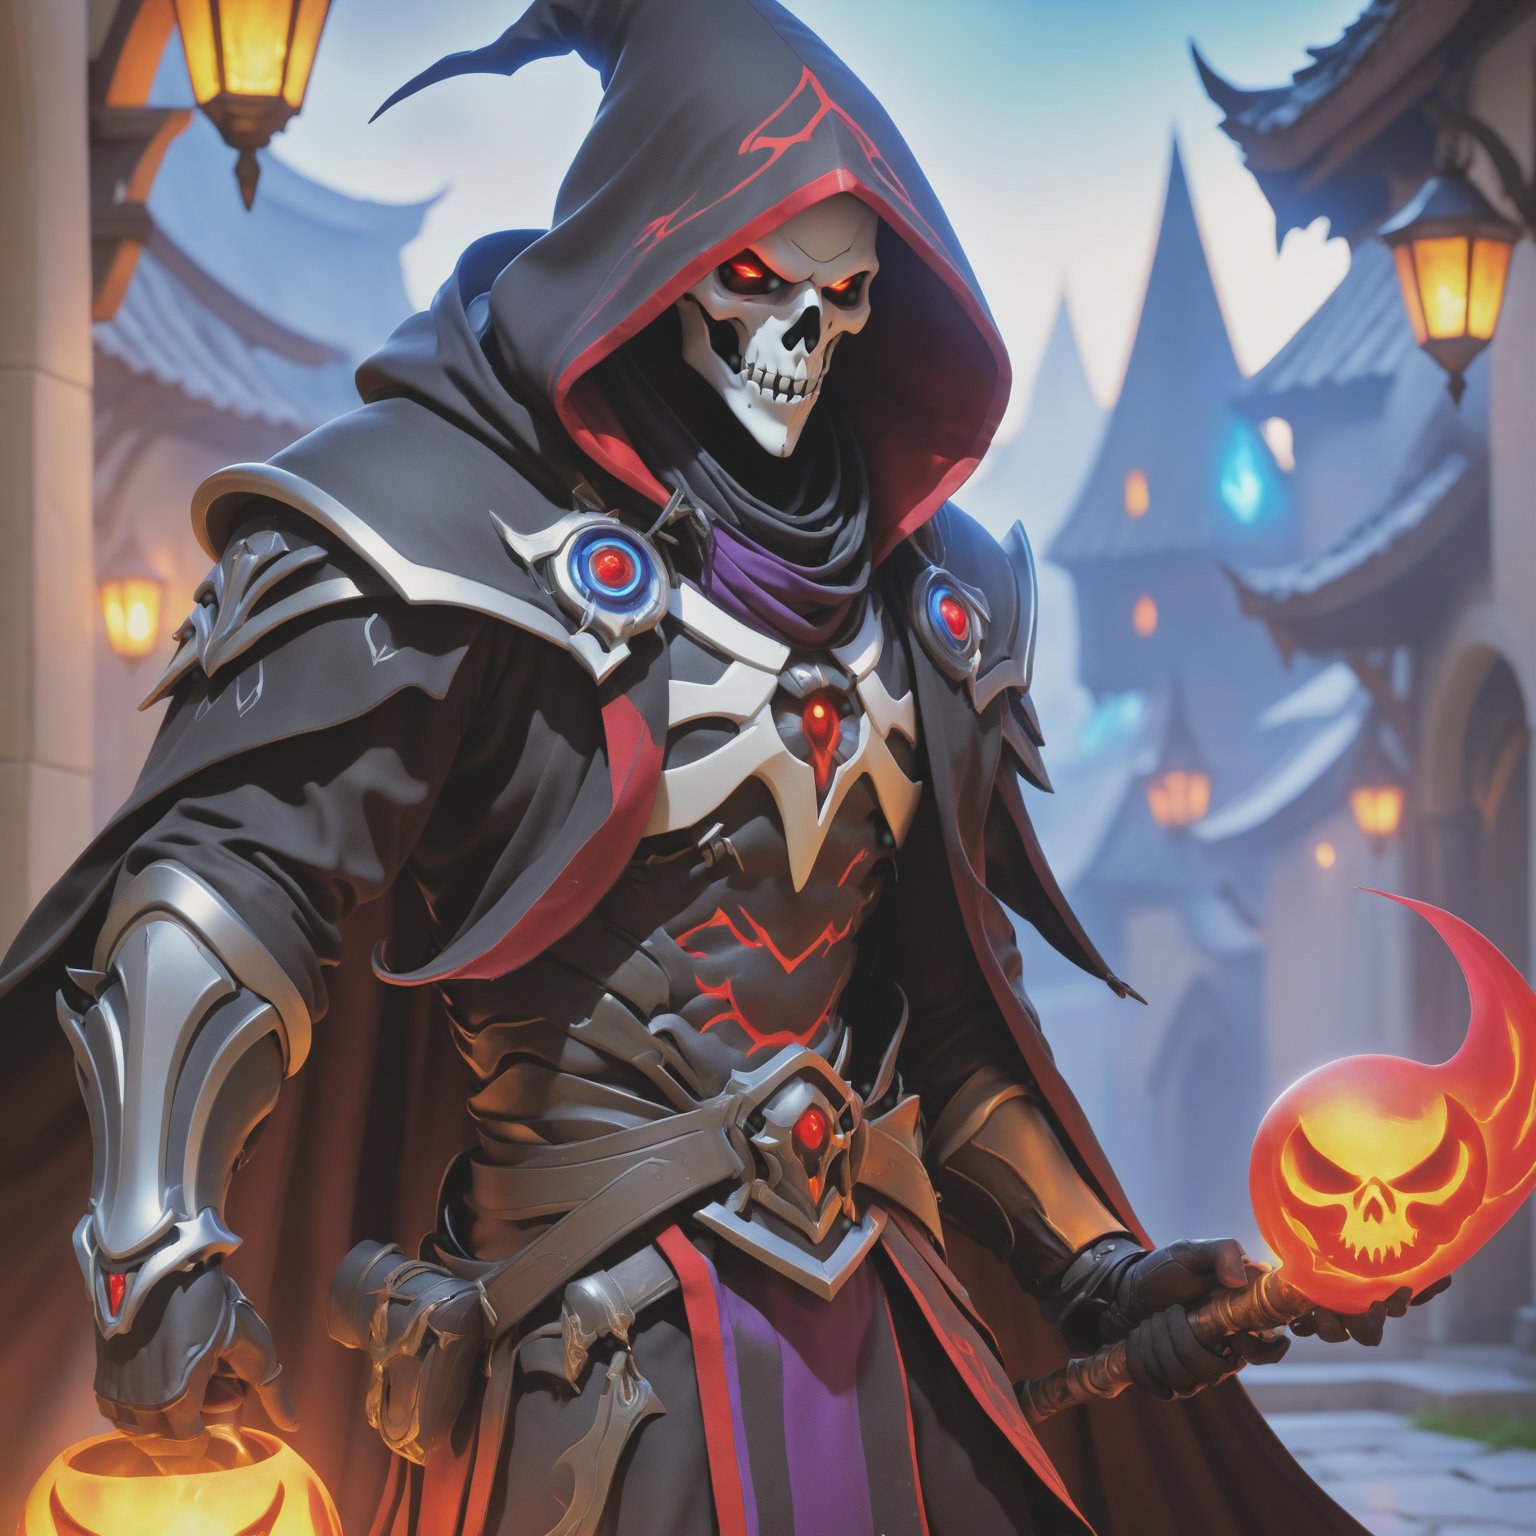 (best quality), (4K, HDR), ((Overwatch)), mage Reaper, musuclar man, hooded, strong body, glowing red eyes, death magic (Death shot), fantasy style armor and clothing, fantasy, vibrant colors, dark fantasy, dark